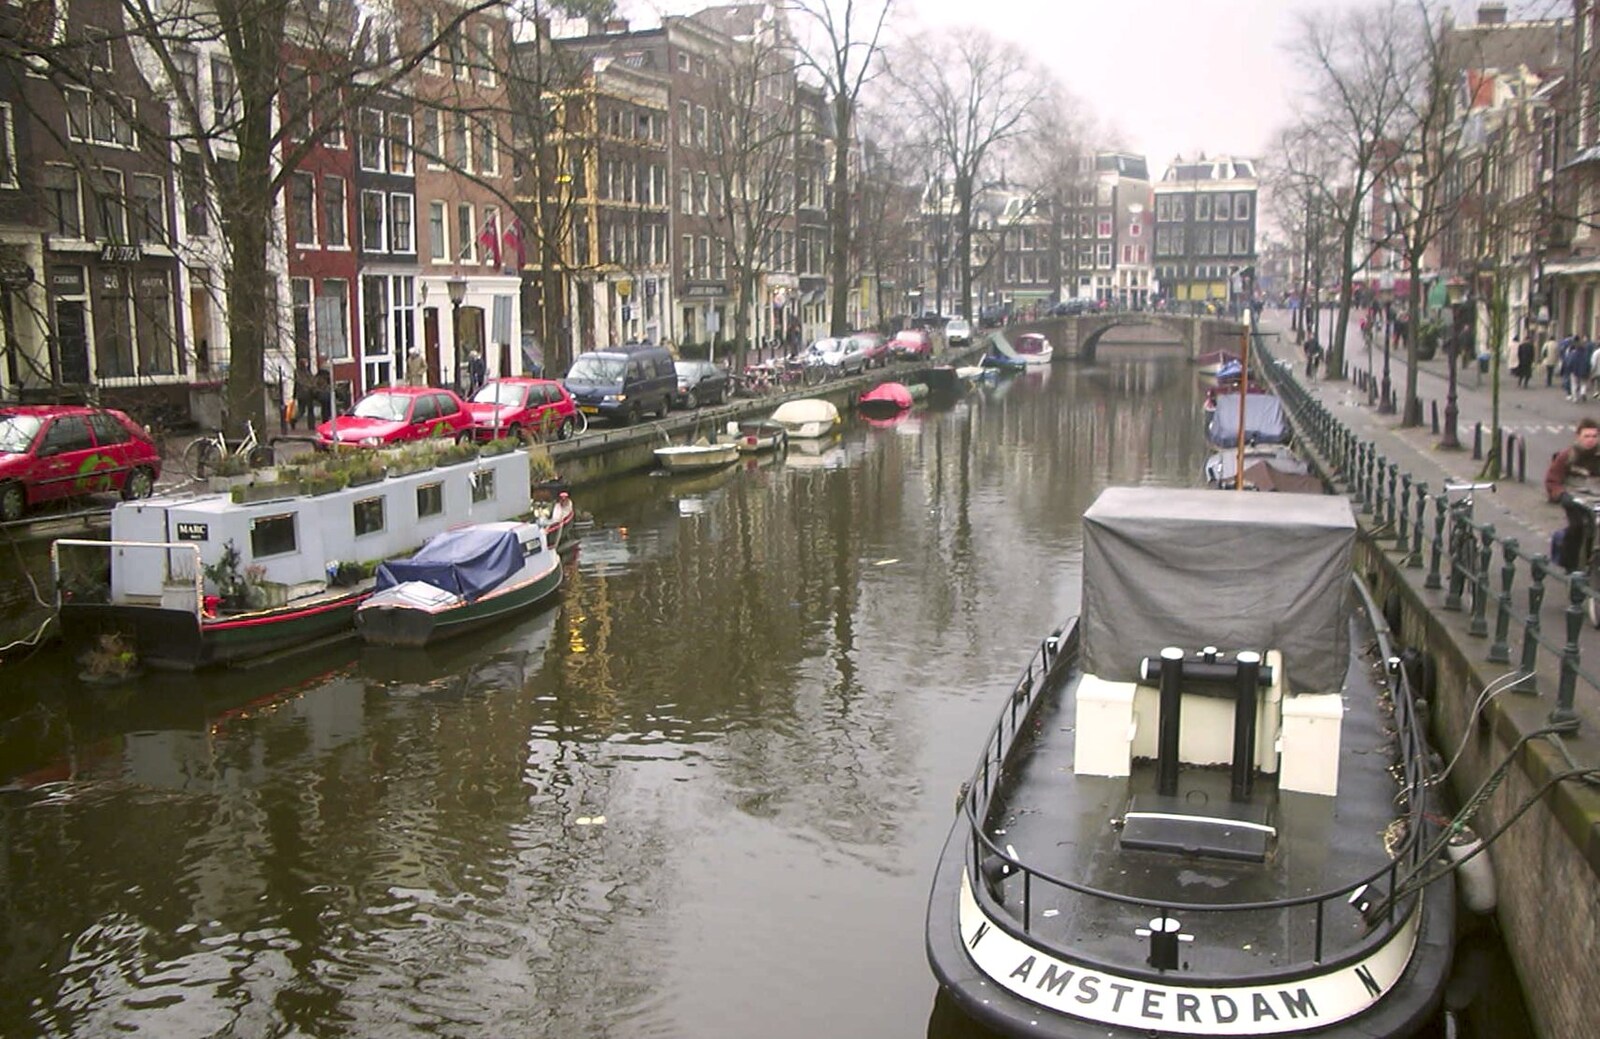 An Amsterdam canal from Anne Frank, Markets and Mikey-P's Stag Do, Amsterdam, Netherlands - 6th March 2004